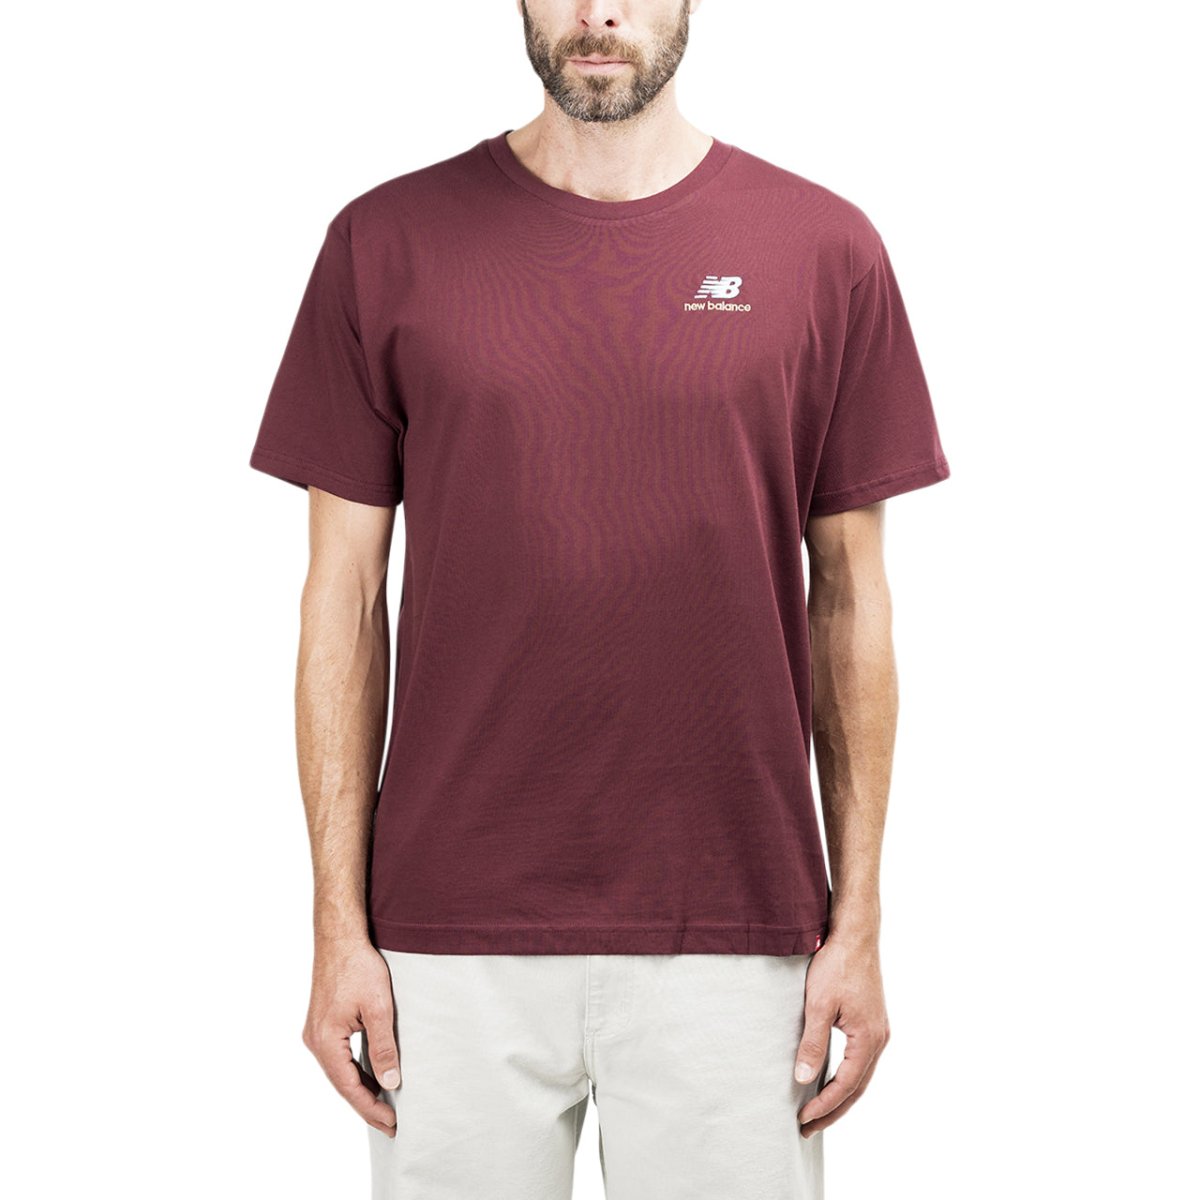 New Balance Essentials Embroidered T-Shirt (Rot)  - Allike Store